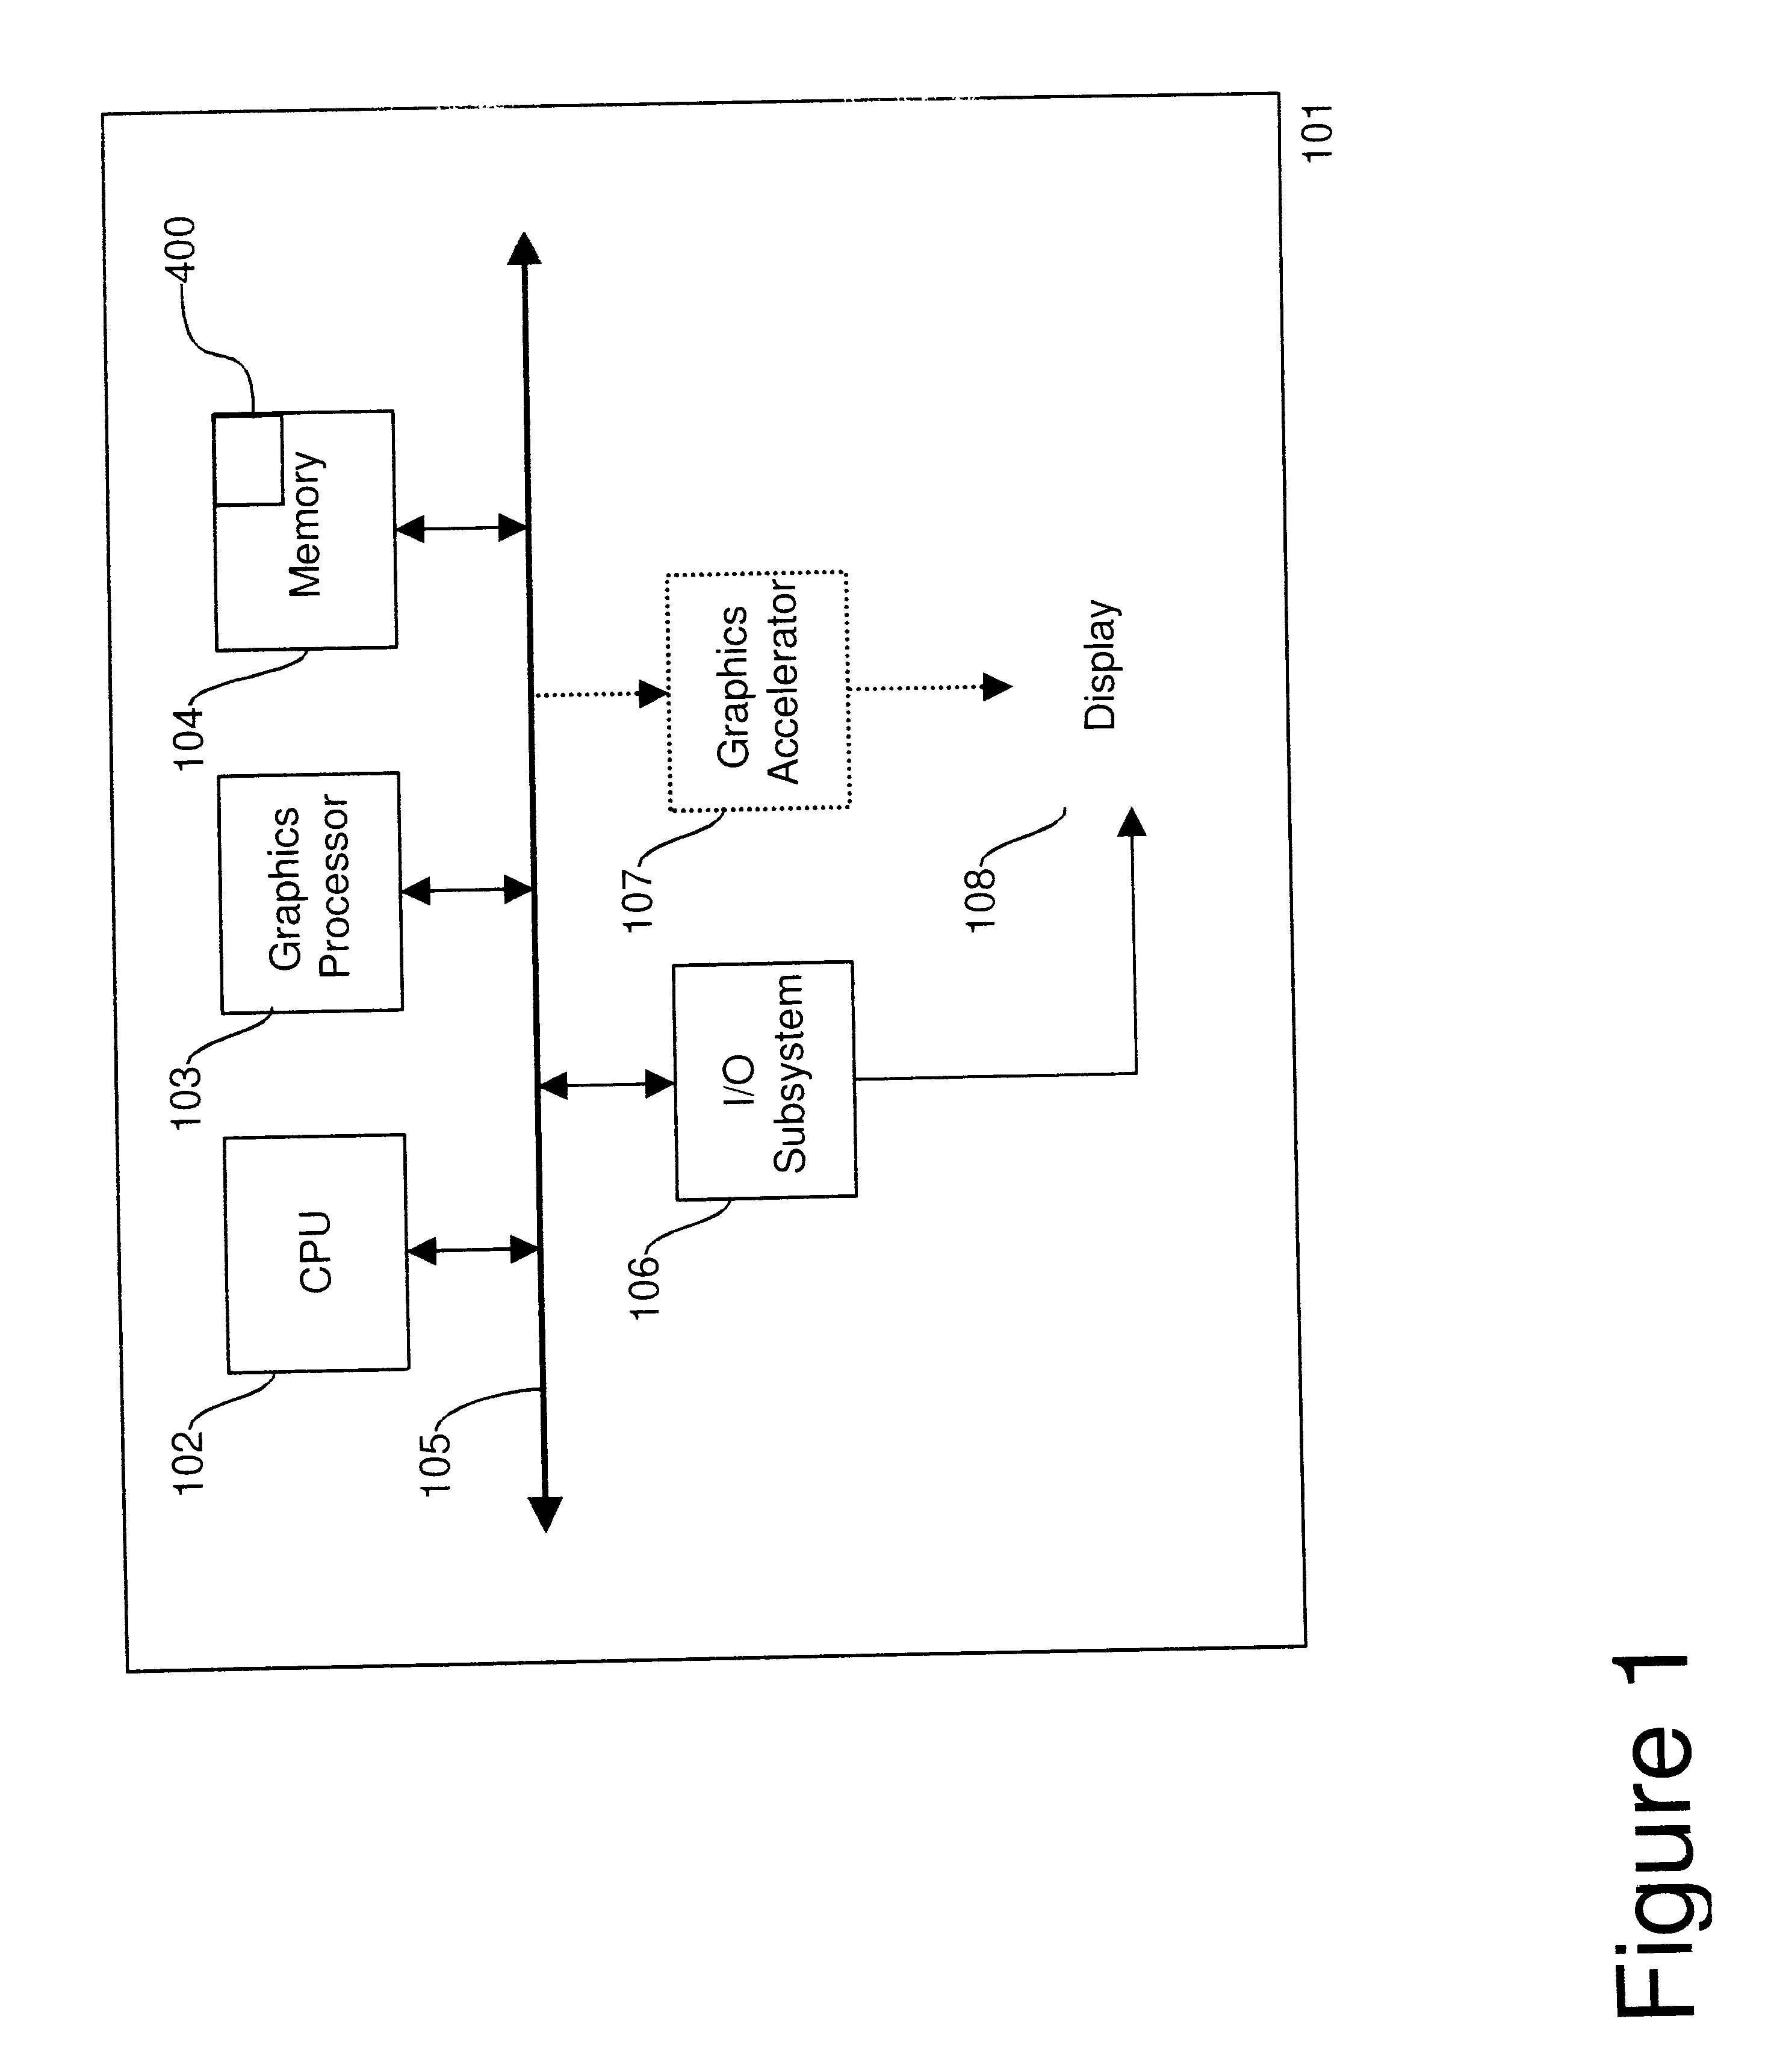 Apparatus, system, and method for simplifying annotations on a geometric surface